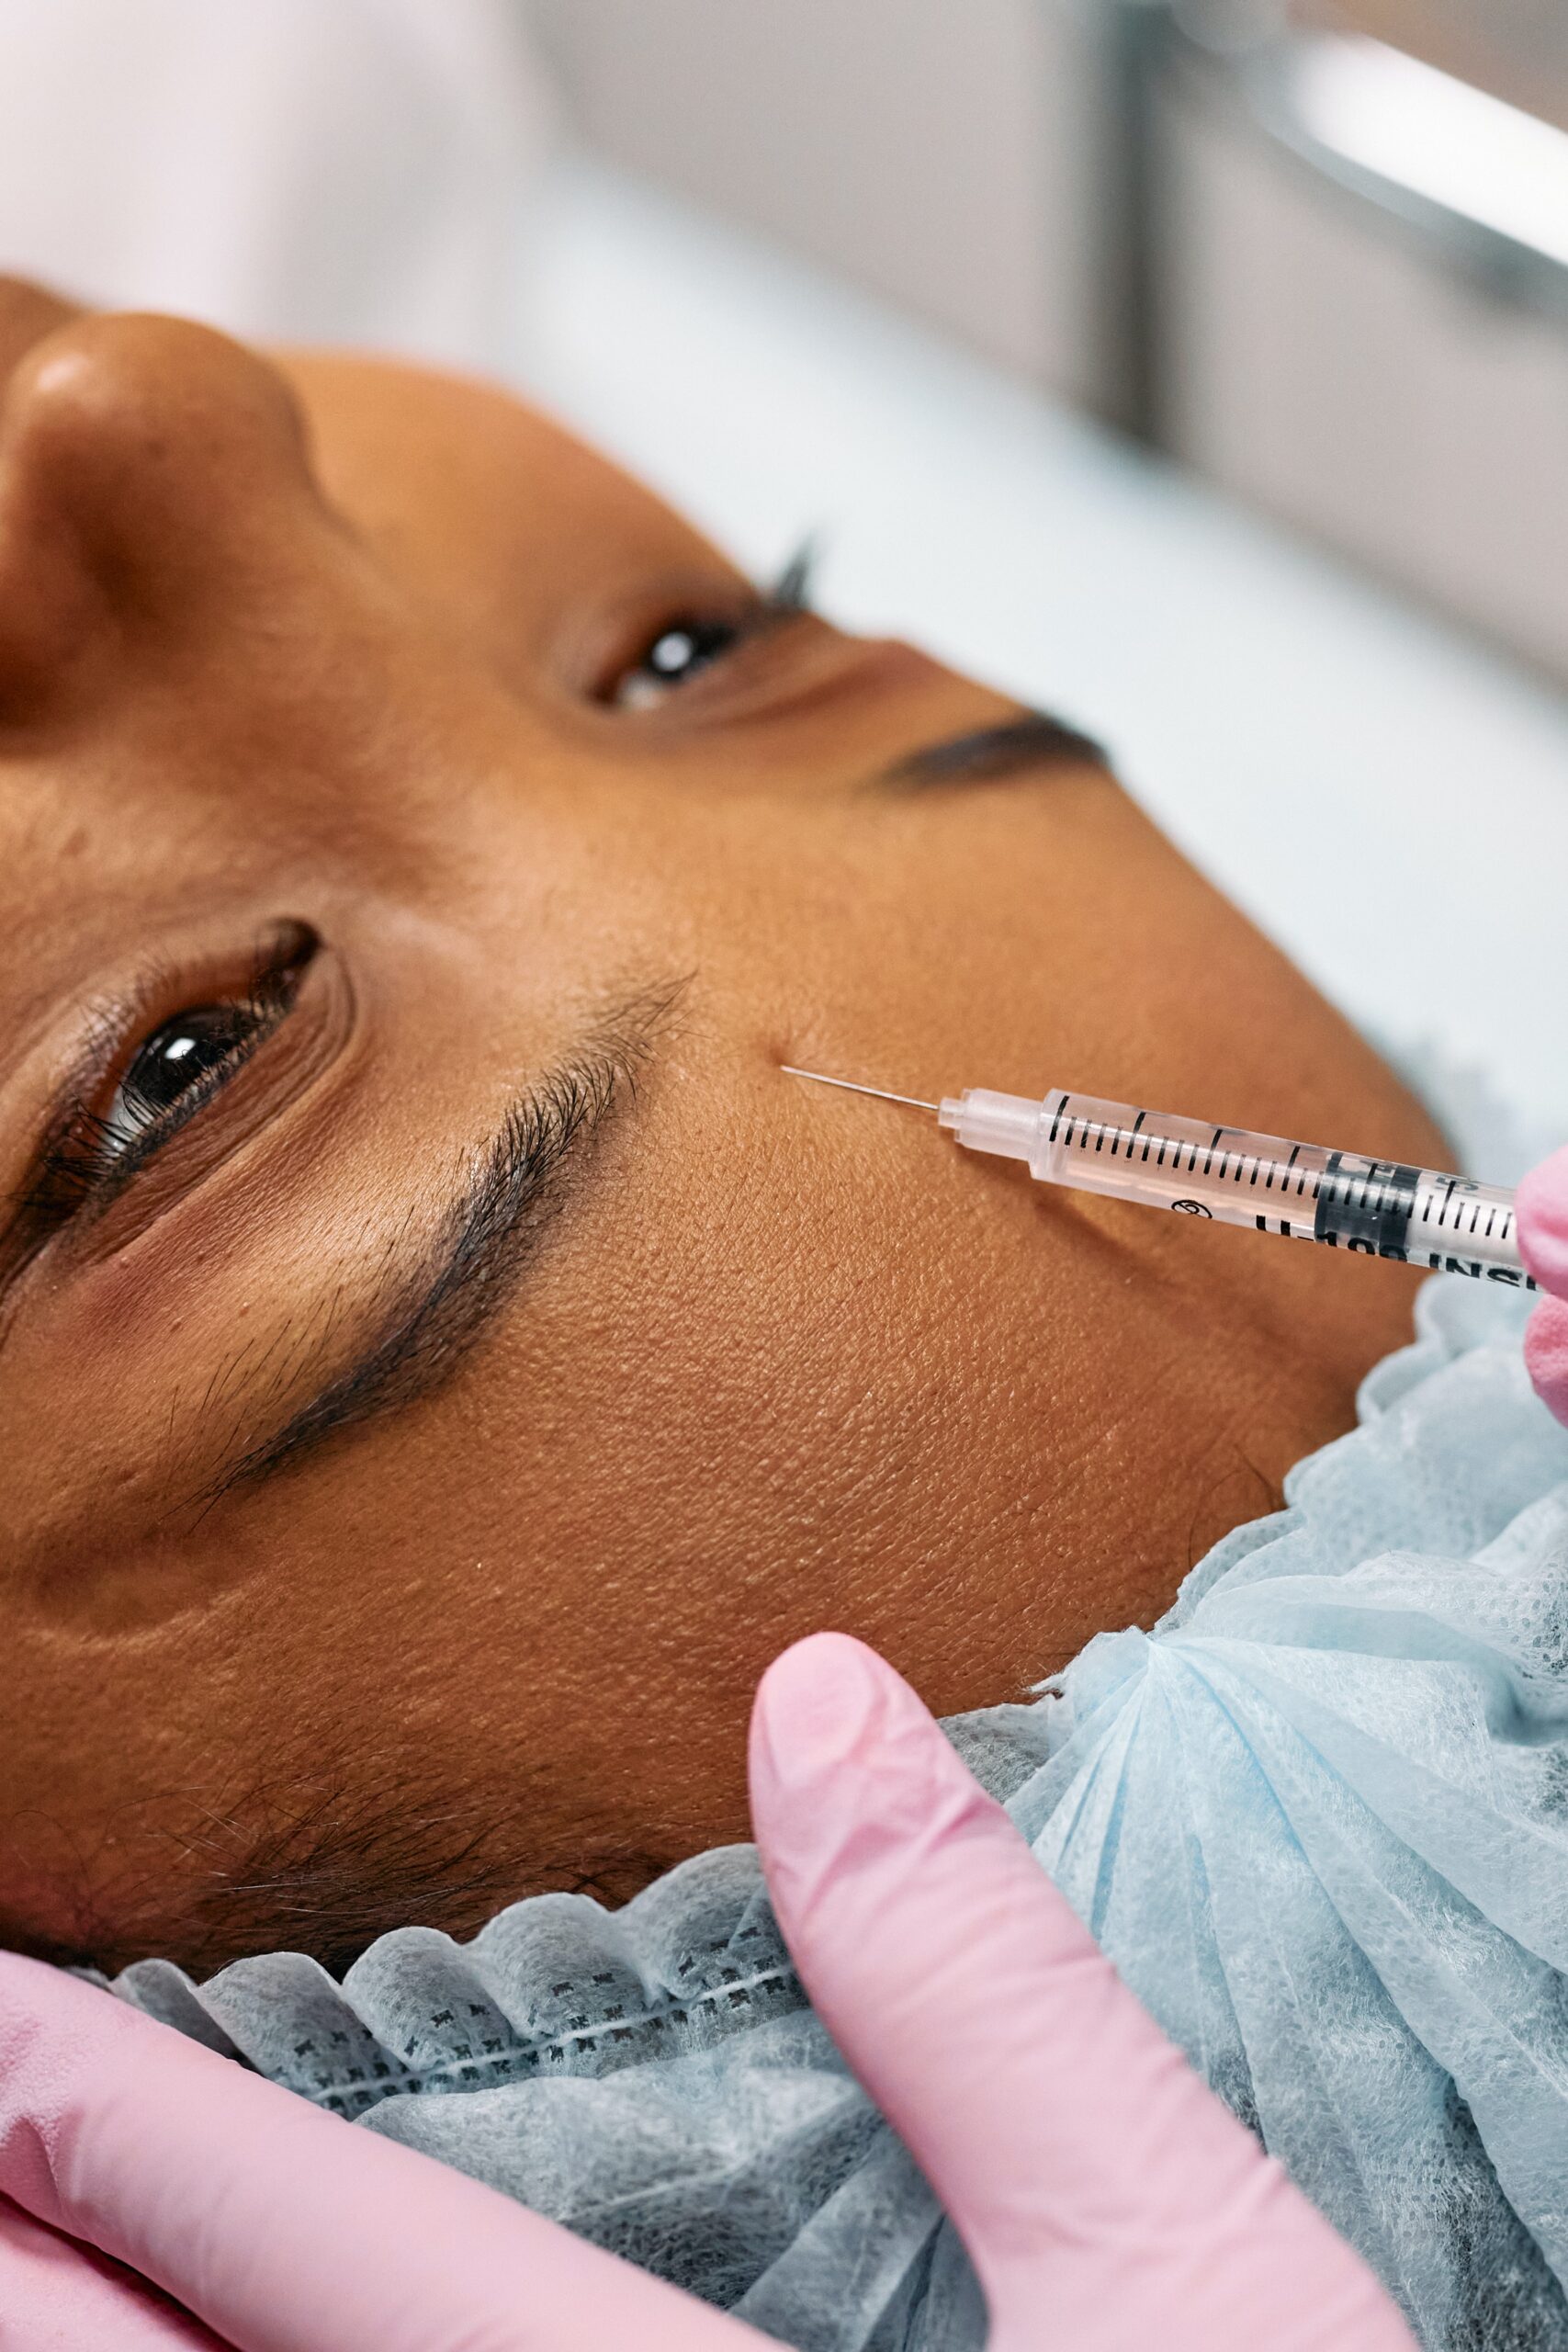 A Look At What's Involved In a Cosmetic Aesthetics Training Course